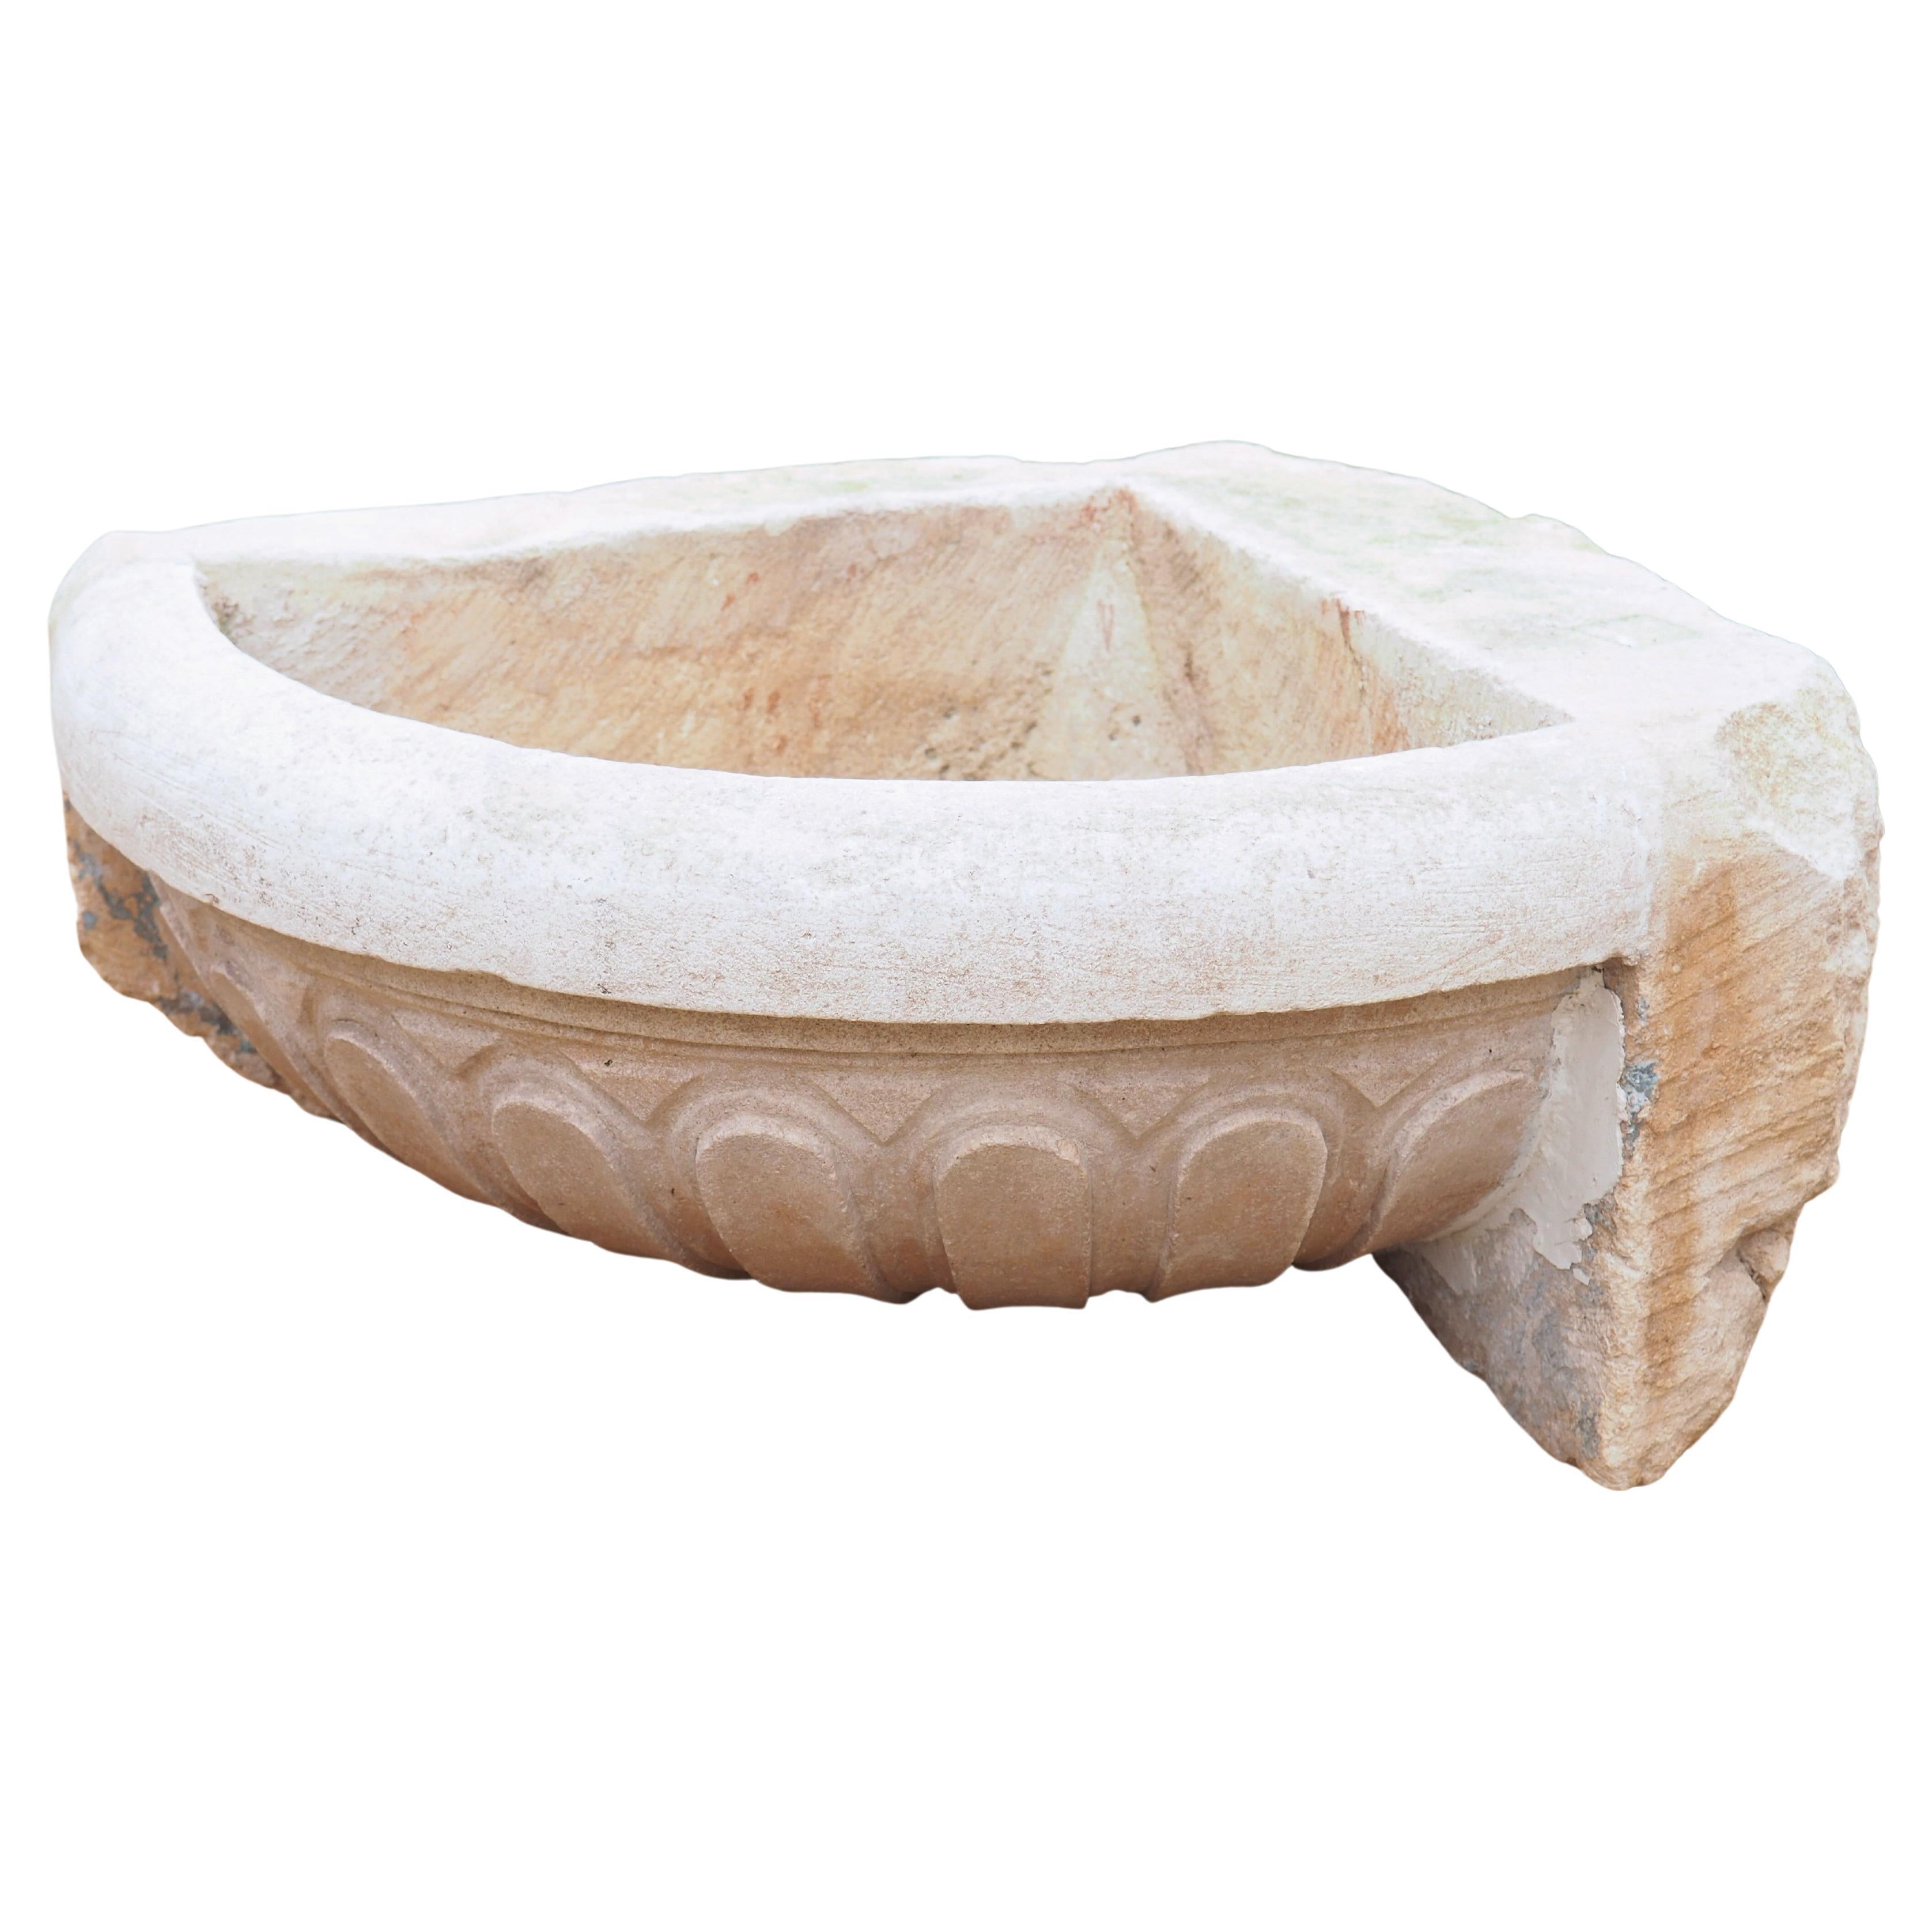 18th Century Carved Limestone Corner Sink or Fountain Basin from Apt, France For Sale